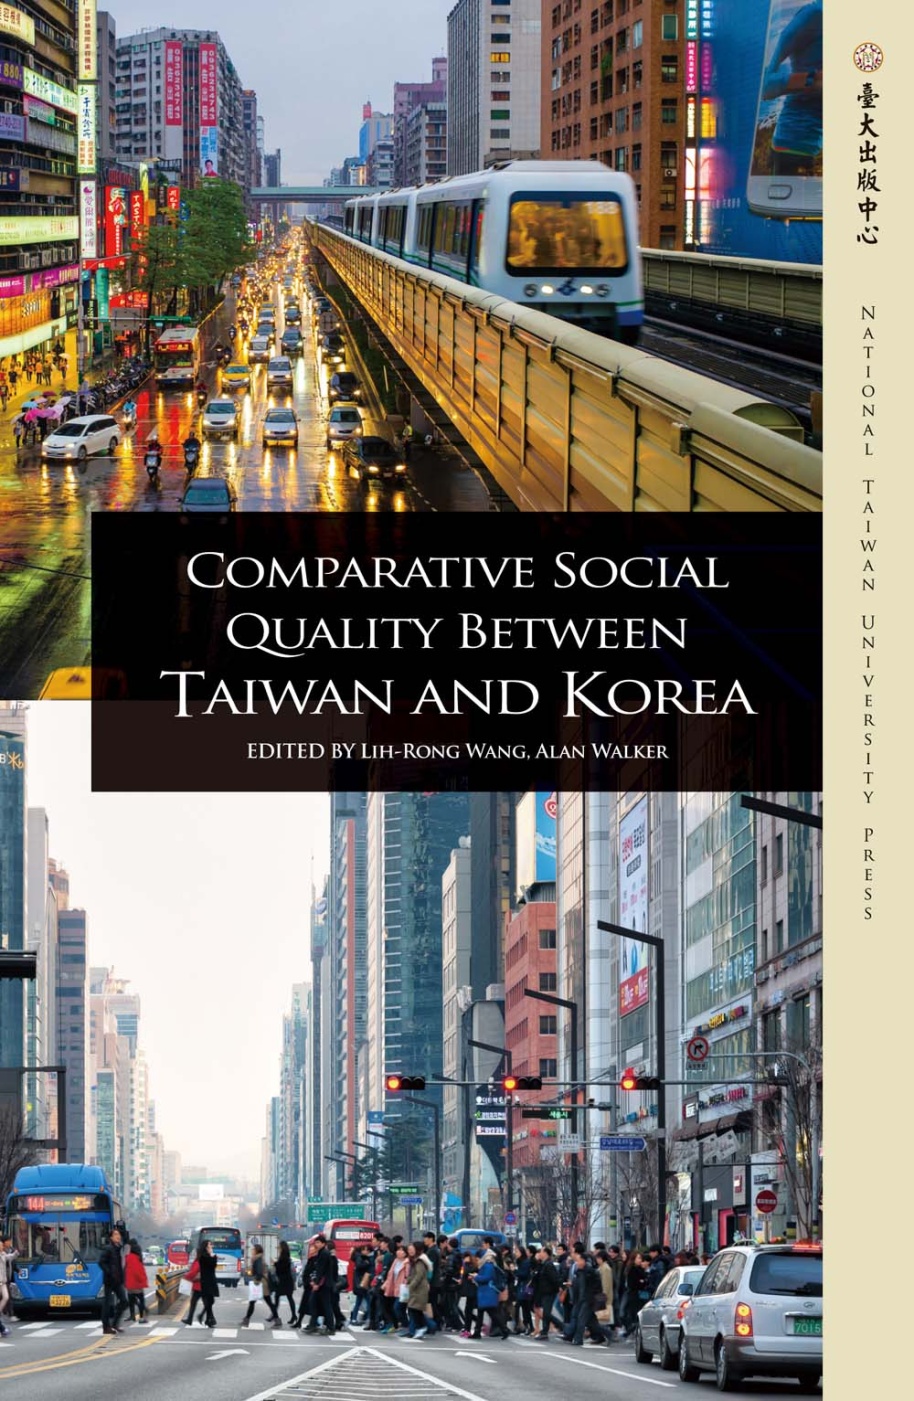 Comparative Social Quality Between Taiwan and Korea